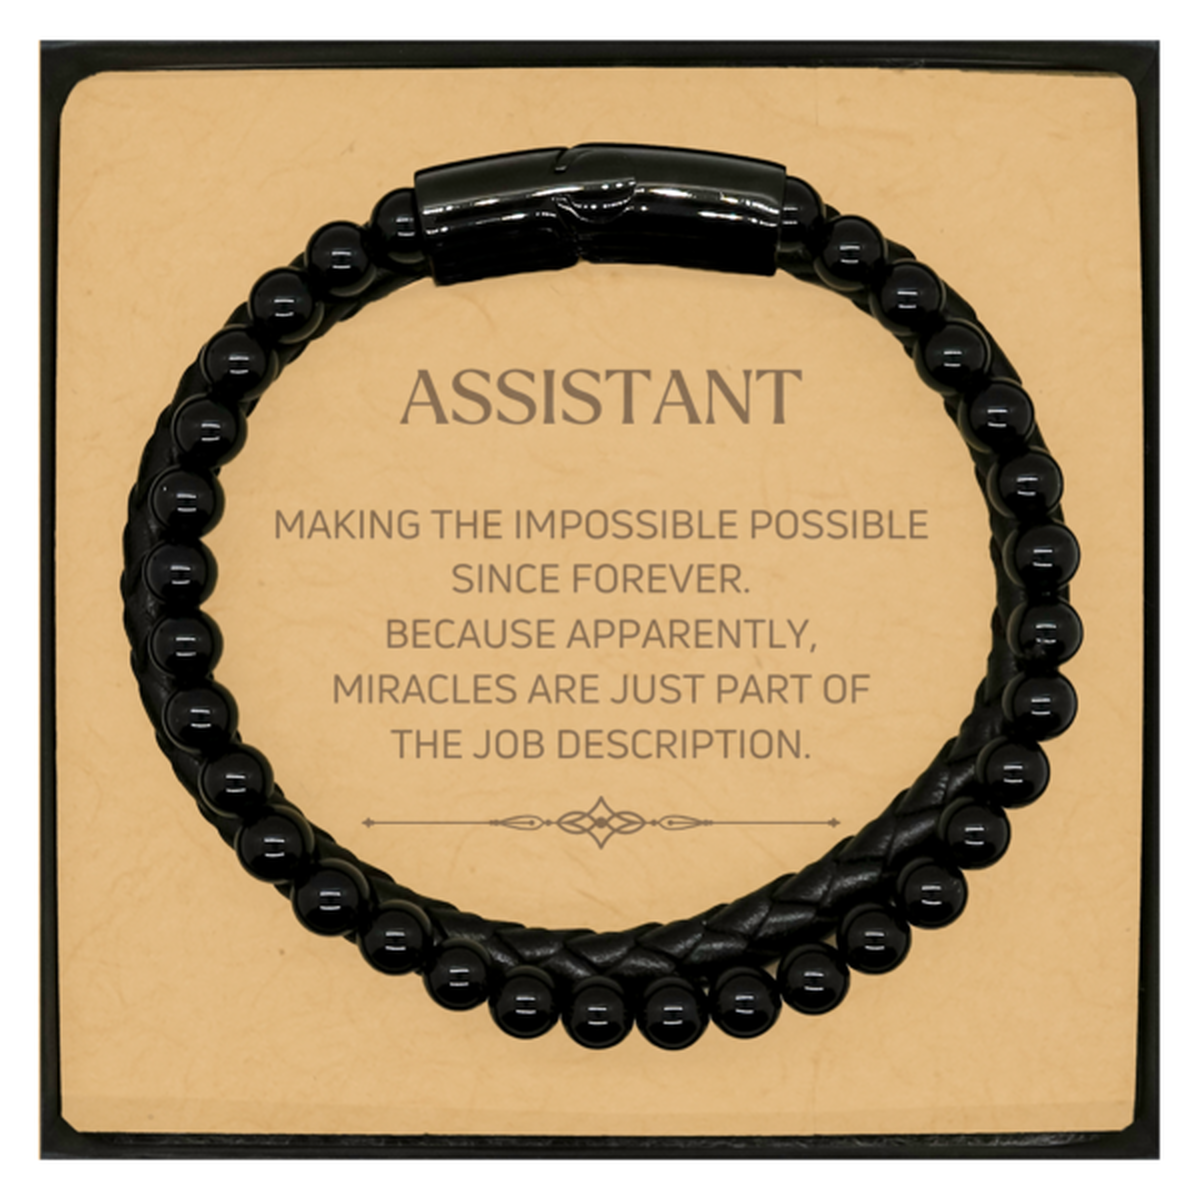 Funny Assistant Gifts, Miracles are just part of the job description, Inspirational Birthday Christmas Stone Leather Bracelets For Assistant, Men, Women, Coworkers, Friends, Boss